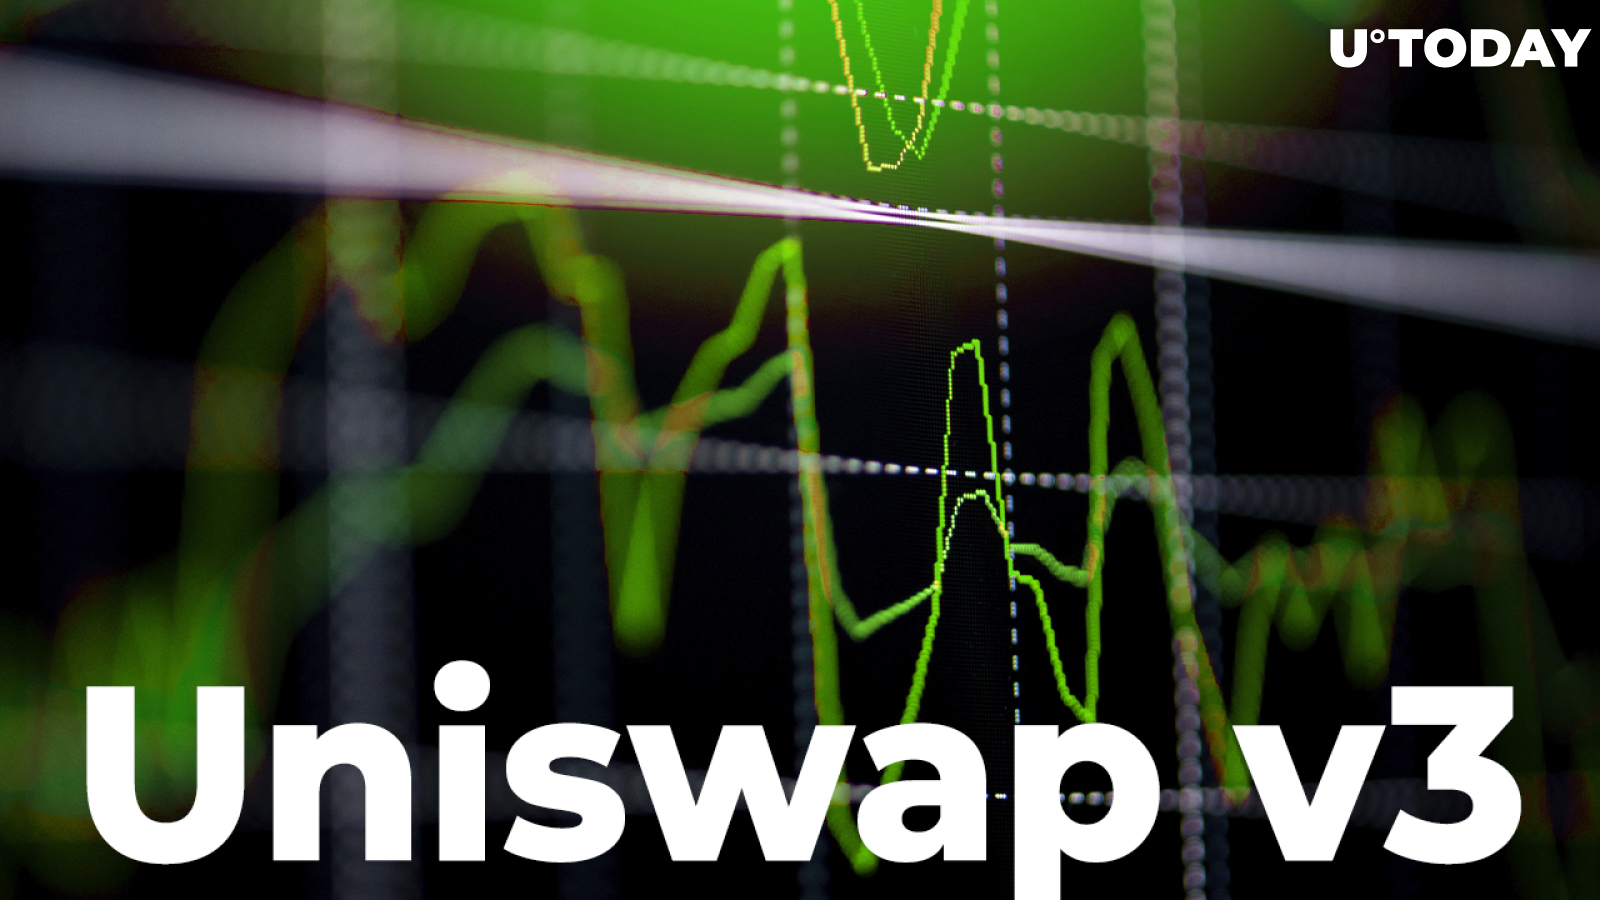 Uniswap v3 Reports Better Liquidity Than Top-Tier Centralized Exchanges